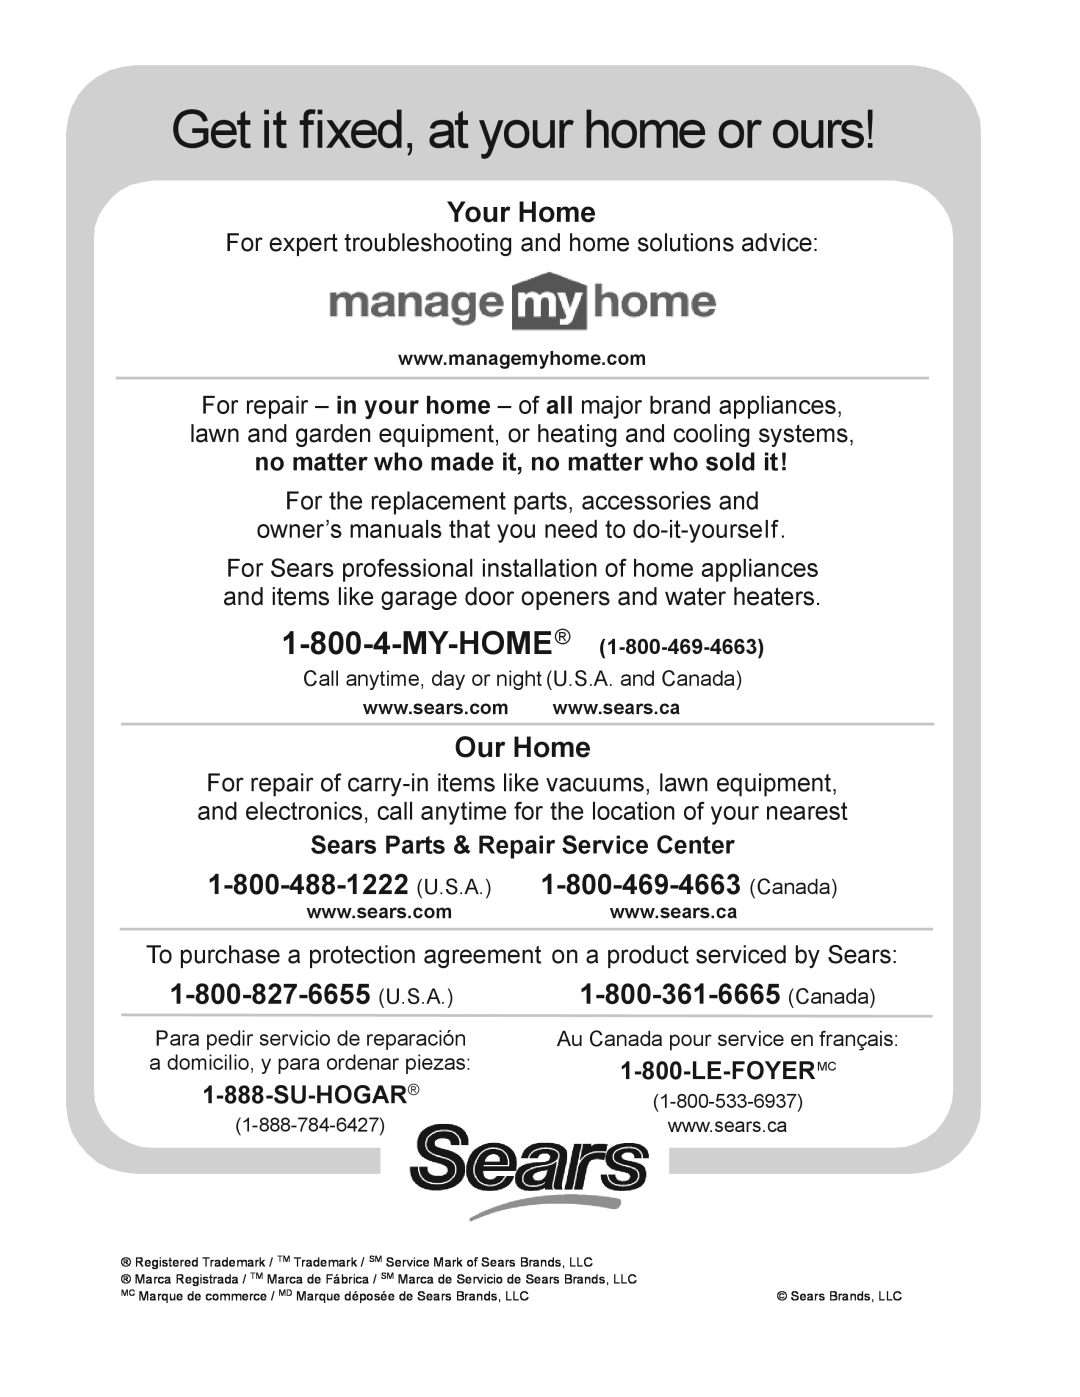 Kenmore 153.336382 Get it fixed, at your home or ours, Your Home, Our Home, Sears Parts & Repair Service Center, Su-Hogar 